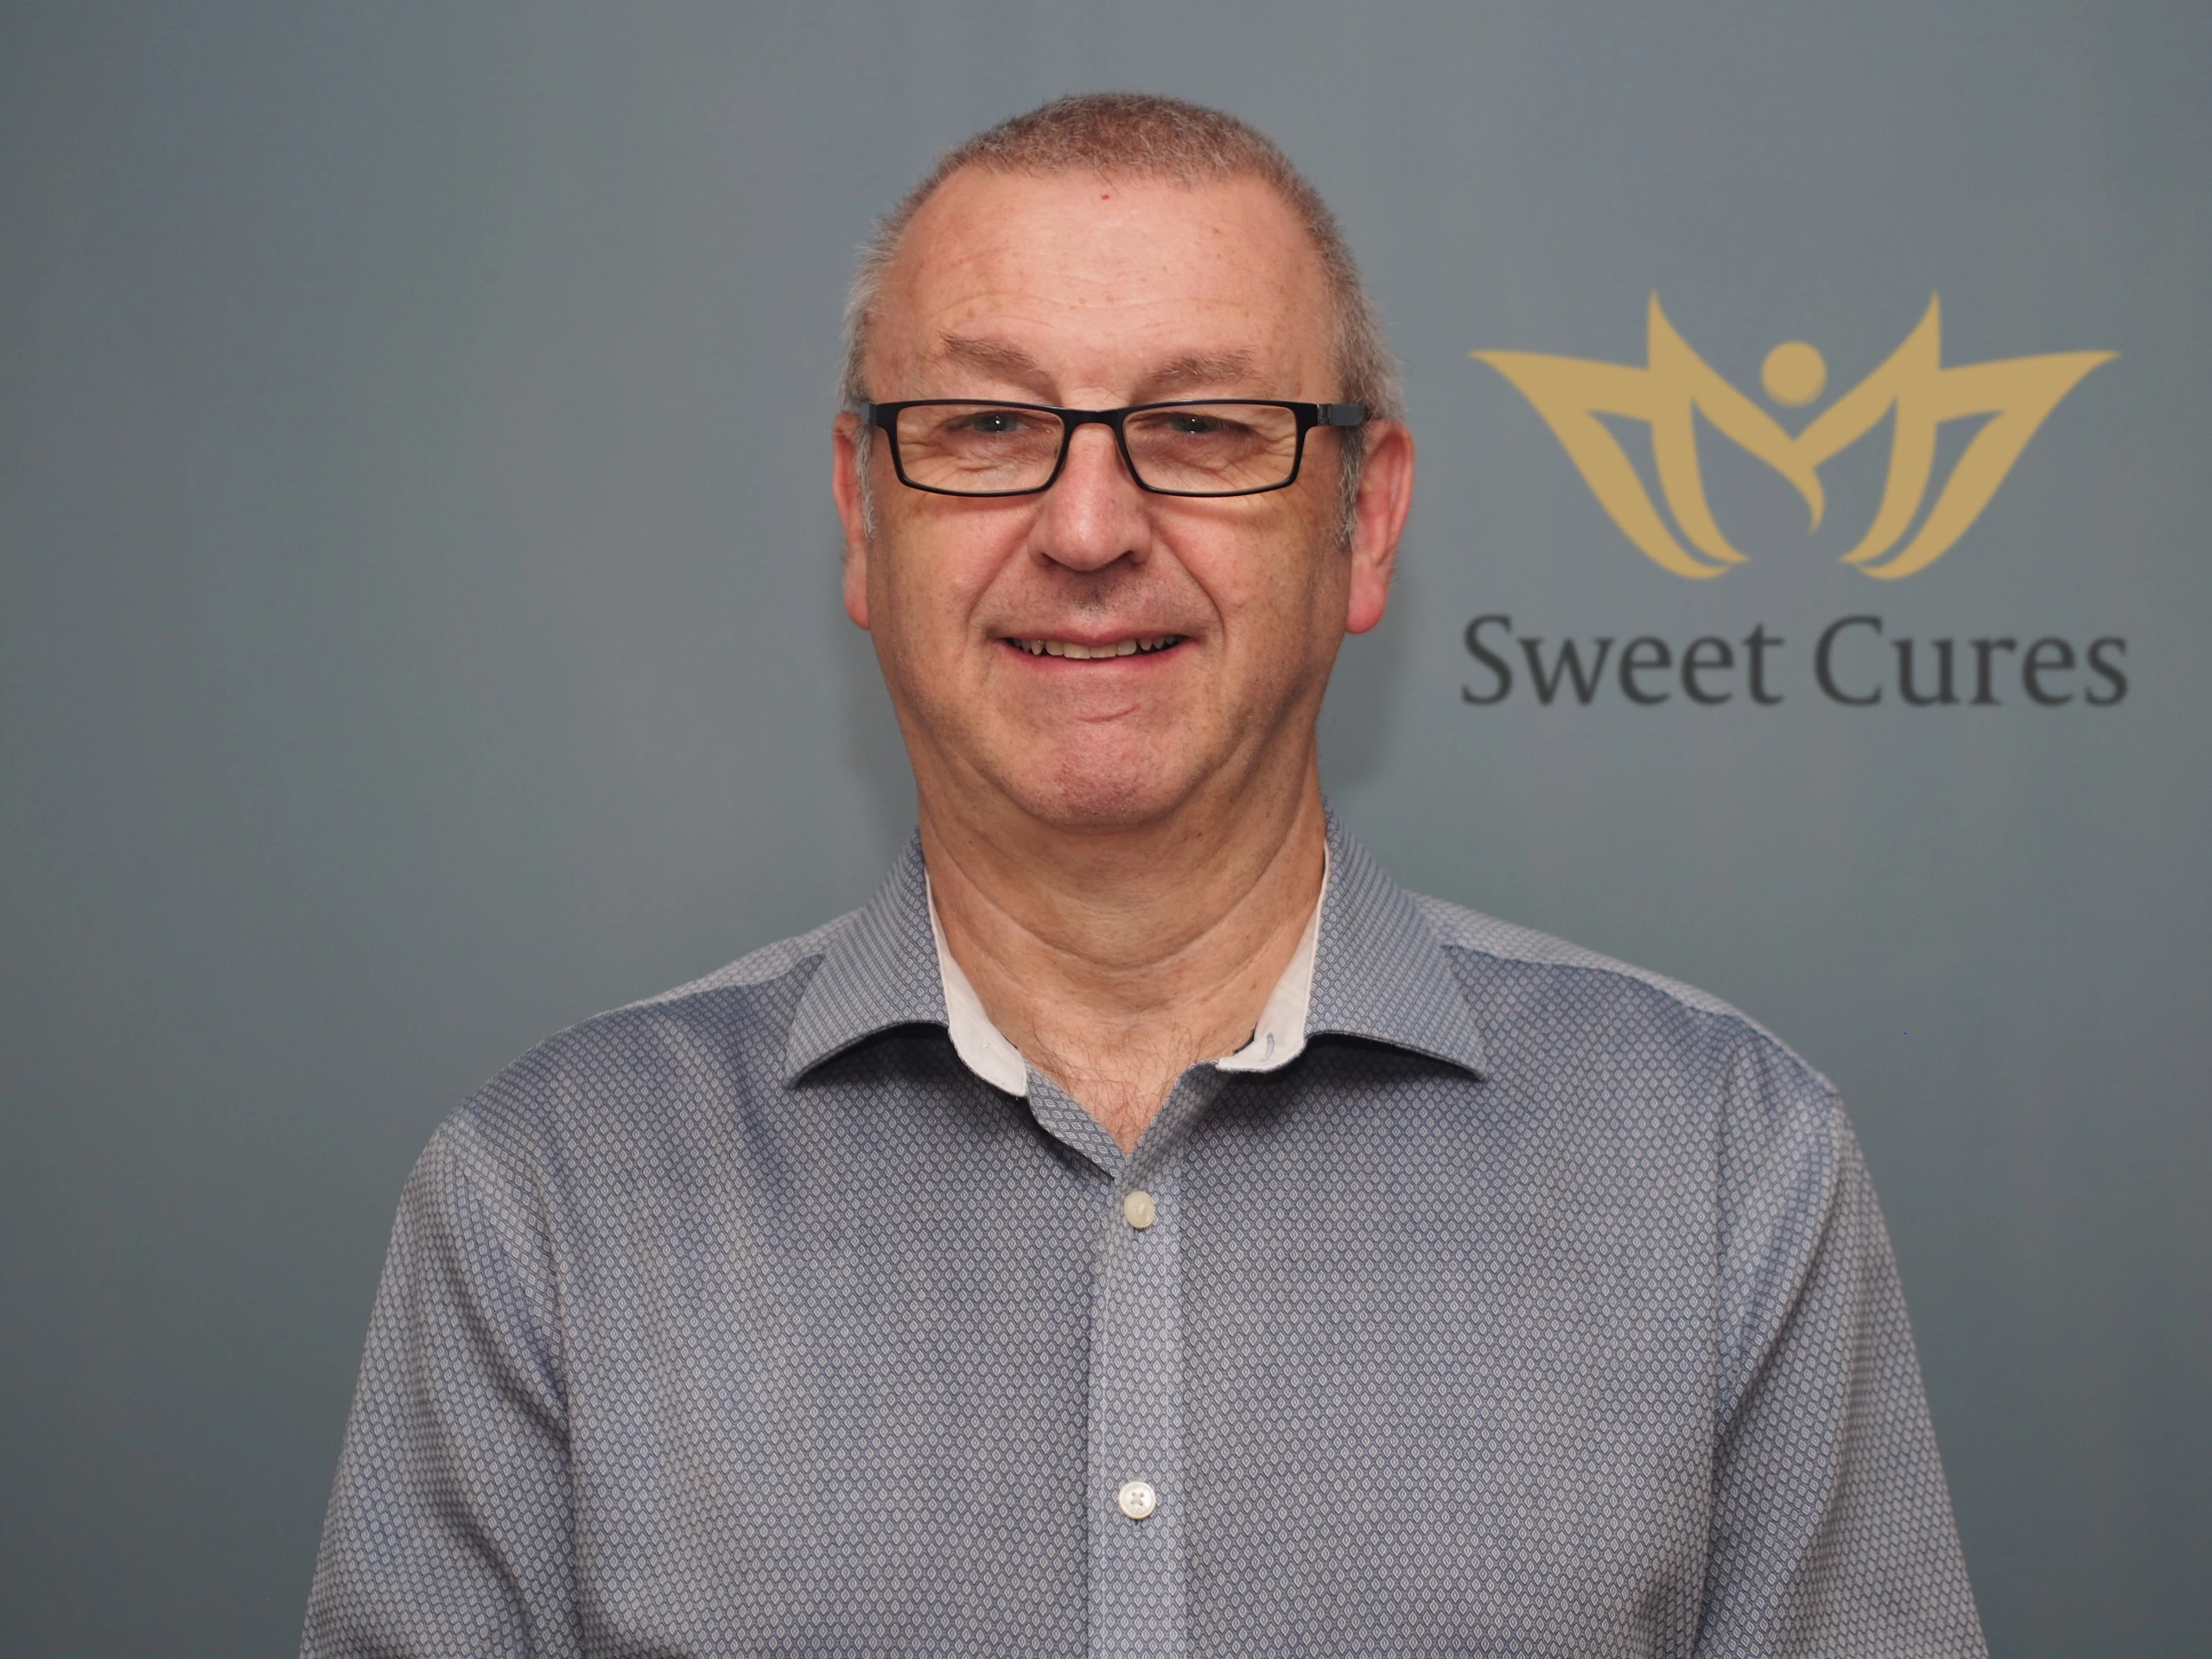 Newly appointed Sales Manager at Sweet Cures, Gary Torbuck